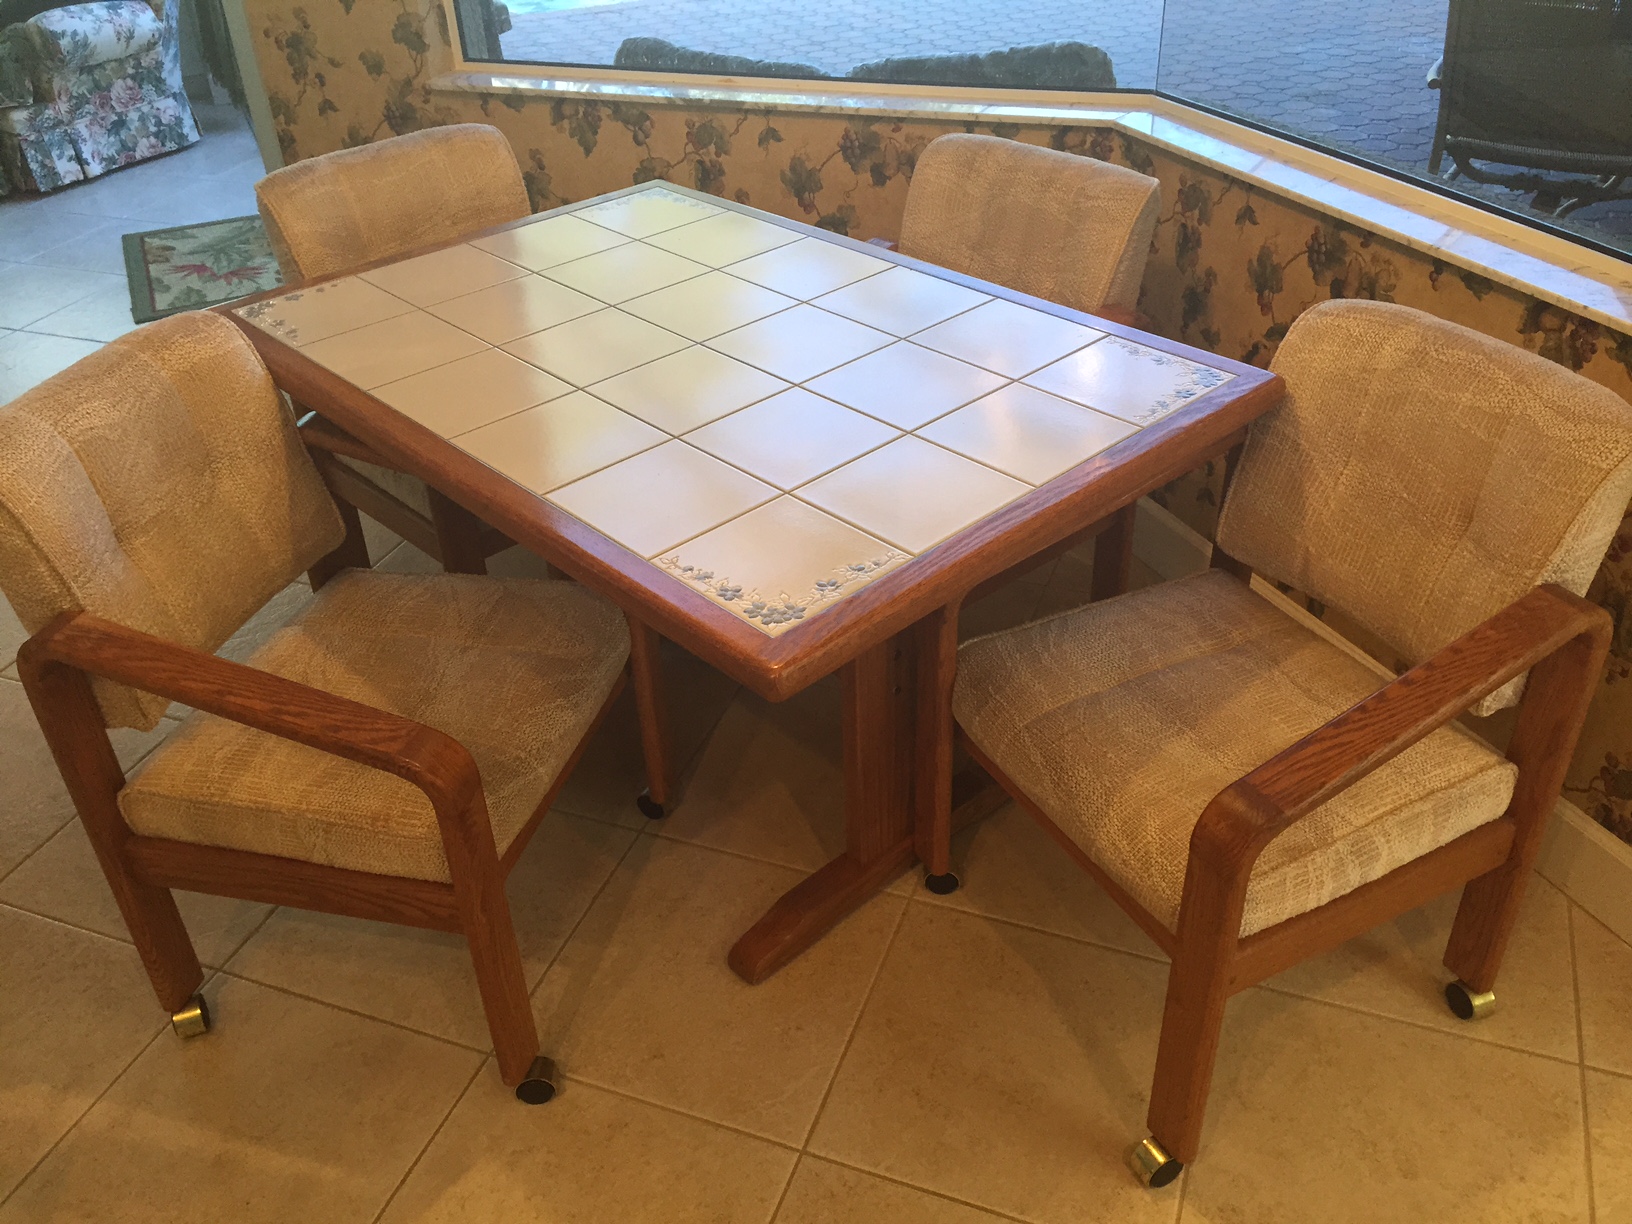 Dinette table & chairs